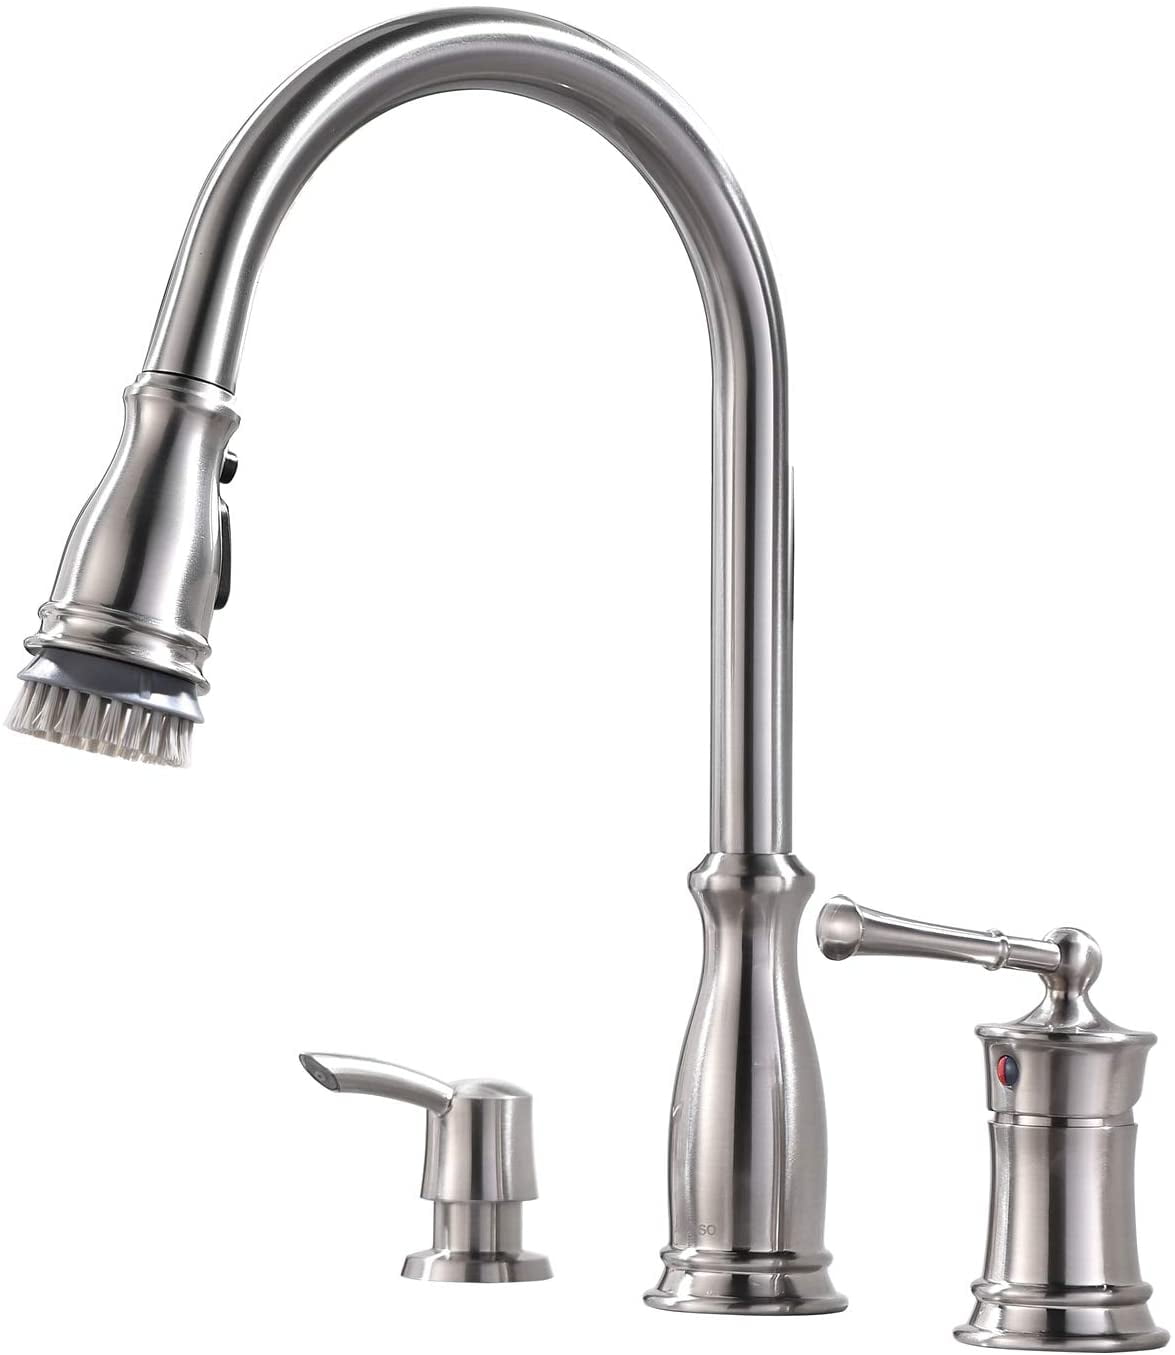 Ready Hot Instant Hot Water Dispenser with Brushed Nickel Hot Water Faucet  with Safety Lock 41-RH-200-F570-BN